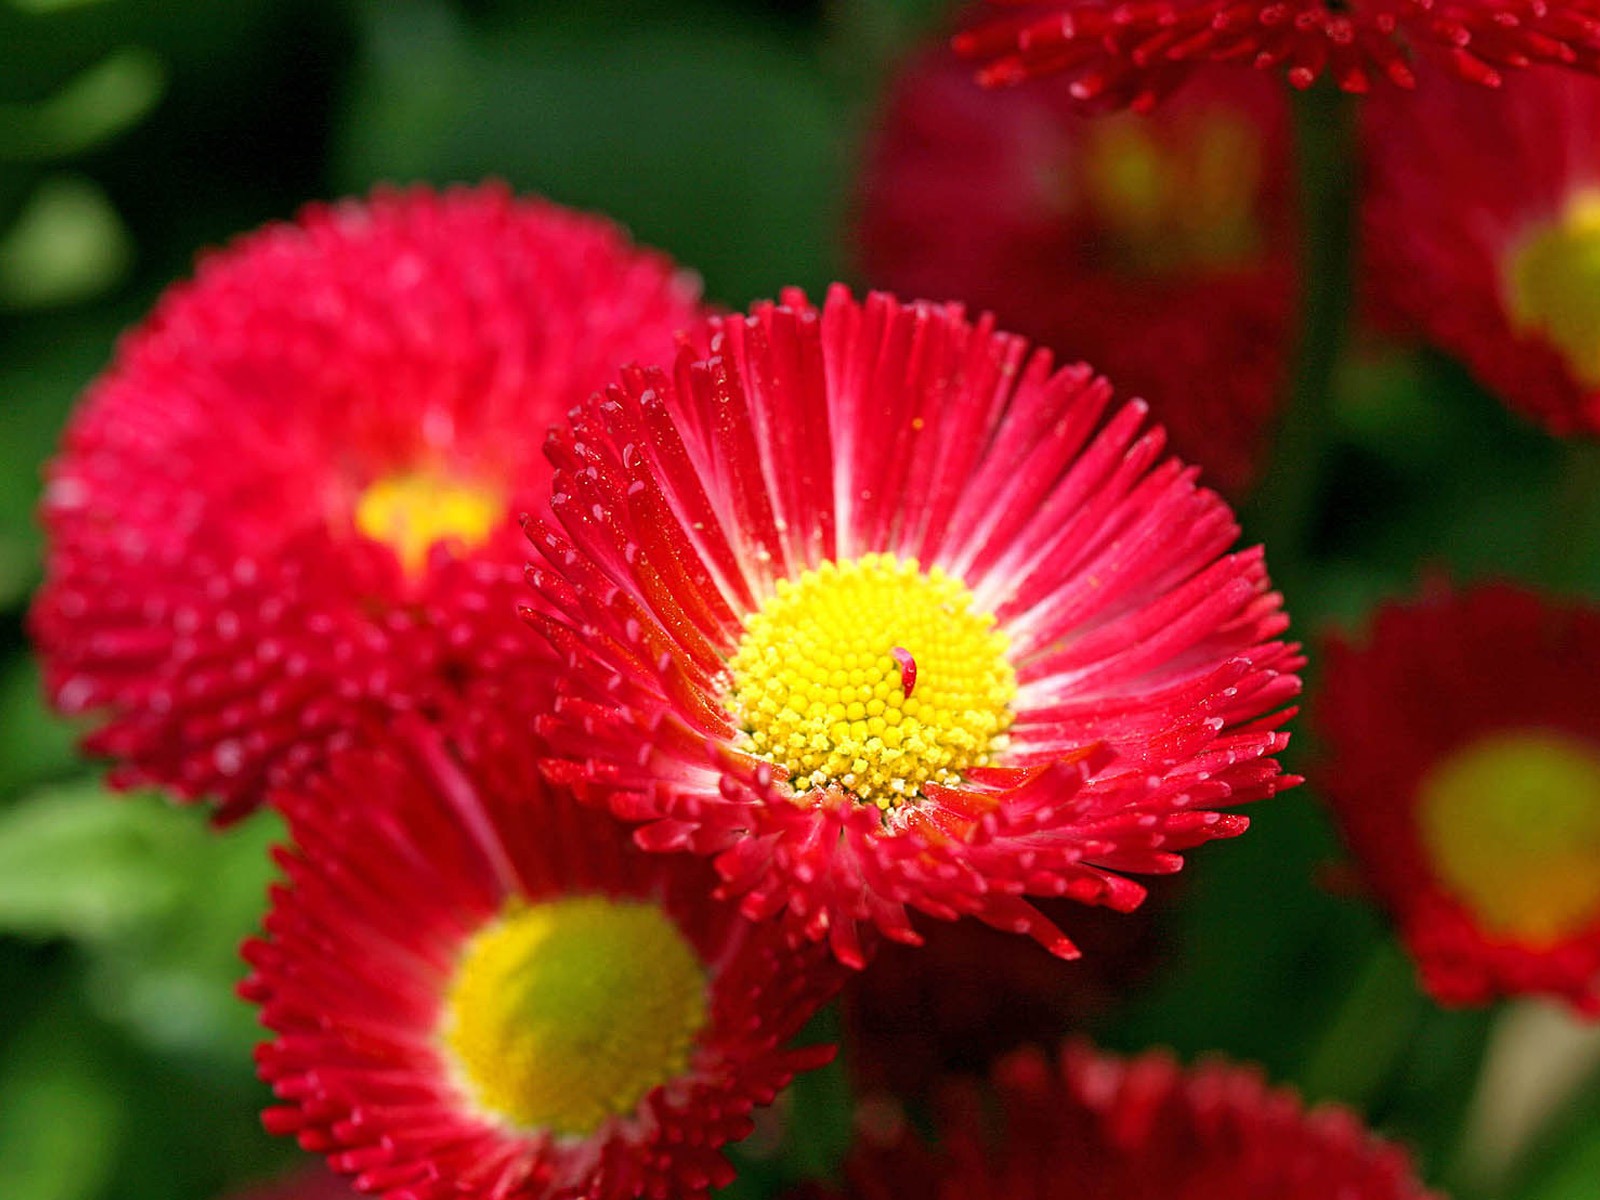 Daisies flowers close-up HD wallpapers #9 - 1600x1200